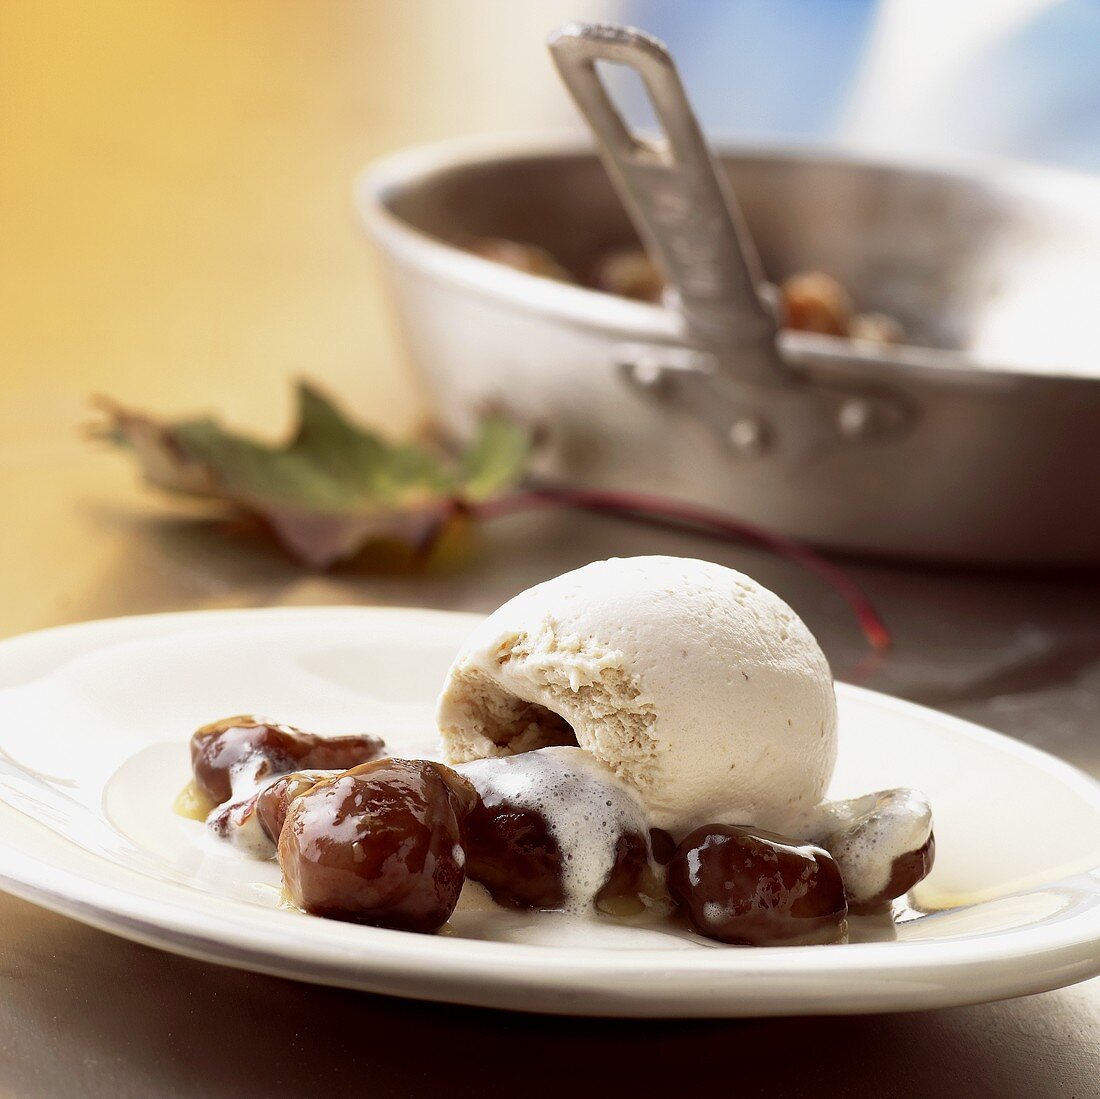 A scoop of chestnut ice cream with glazed chestnuts